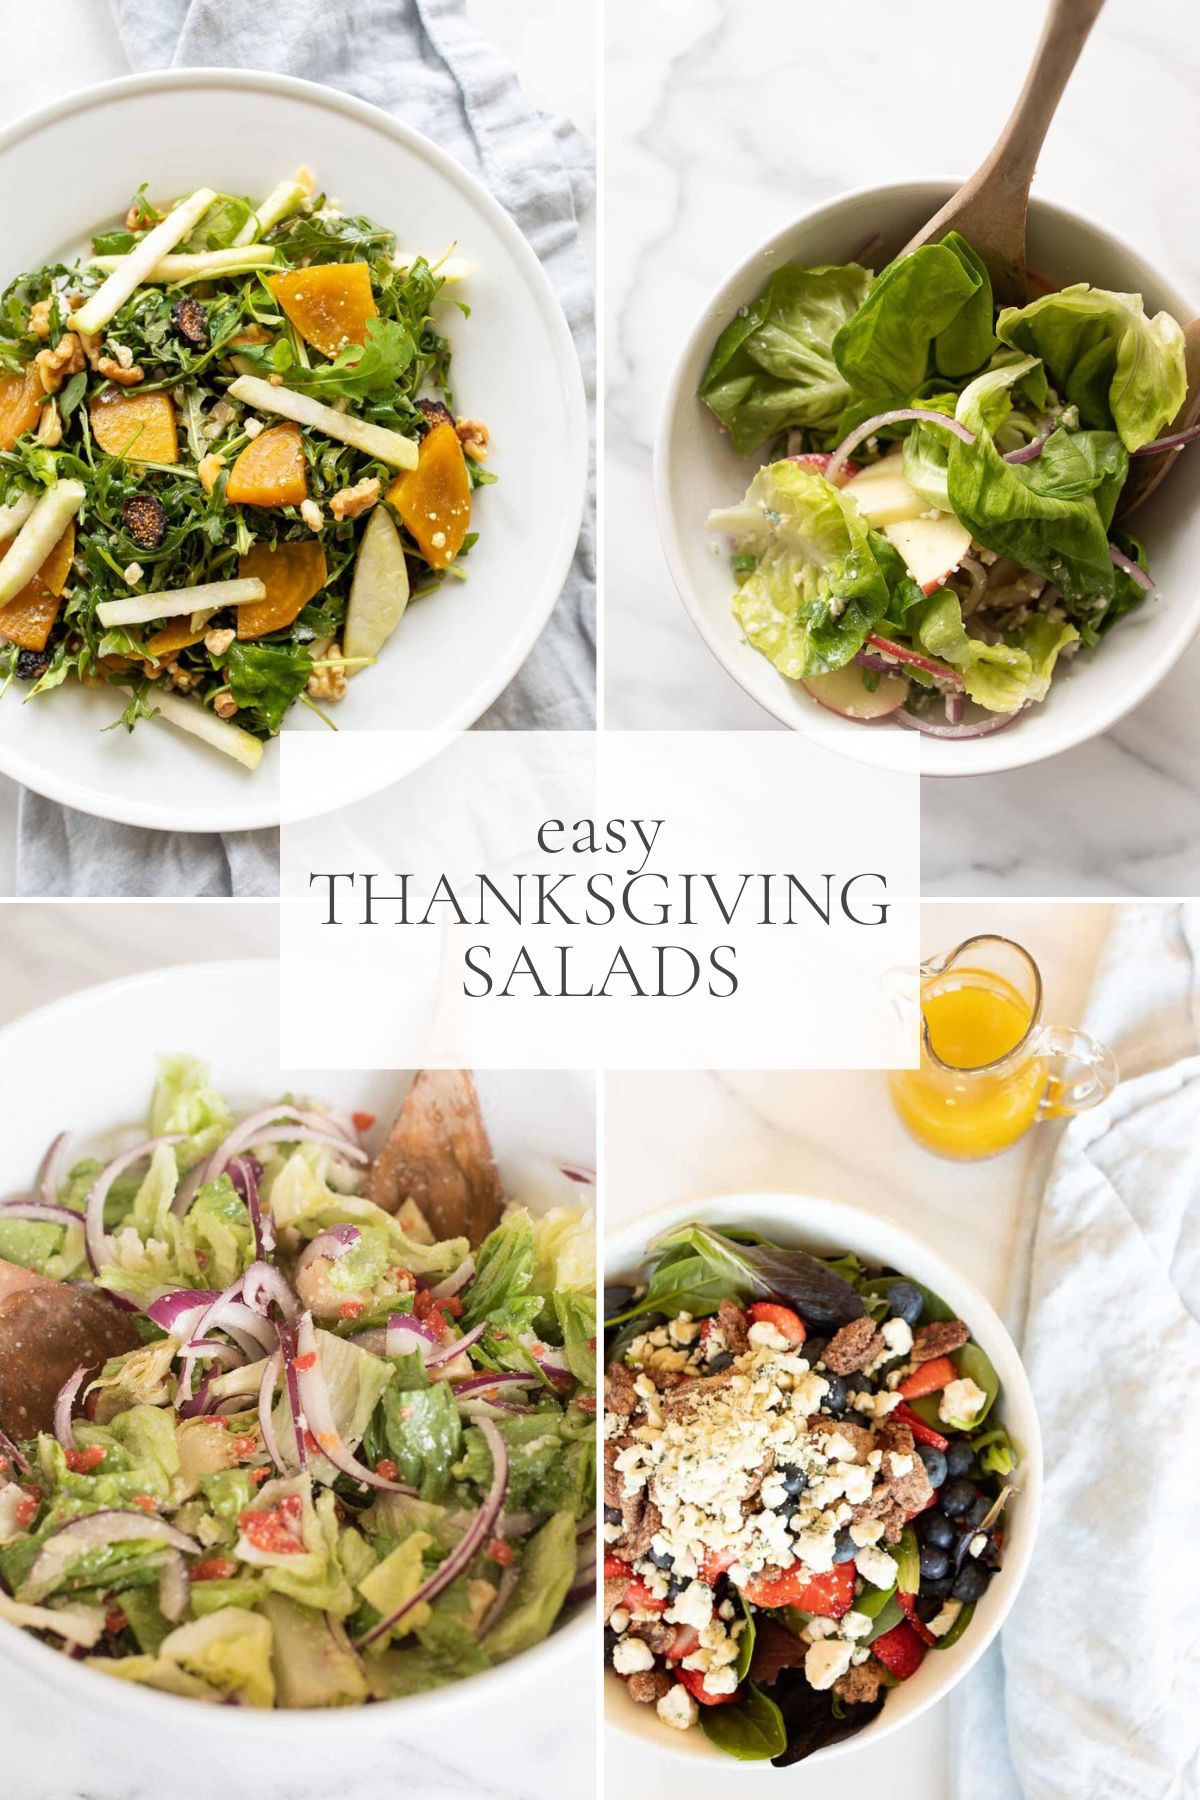 A graphic image featuring a variety of Thanksgiving salads.